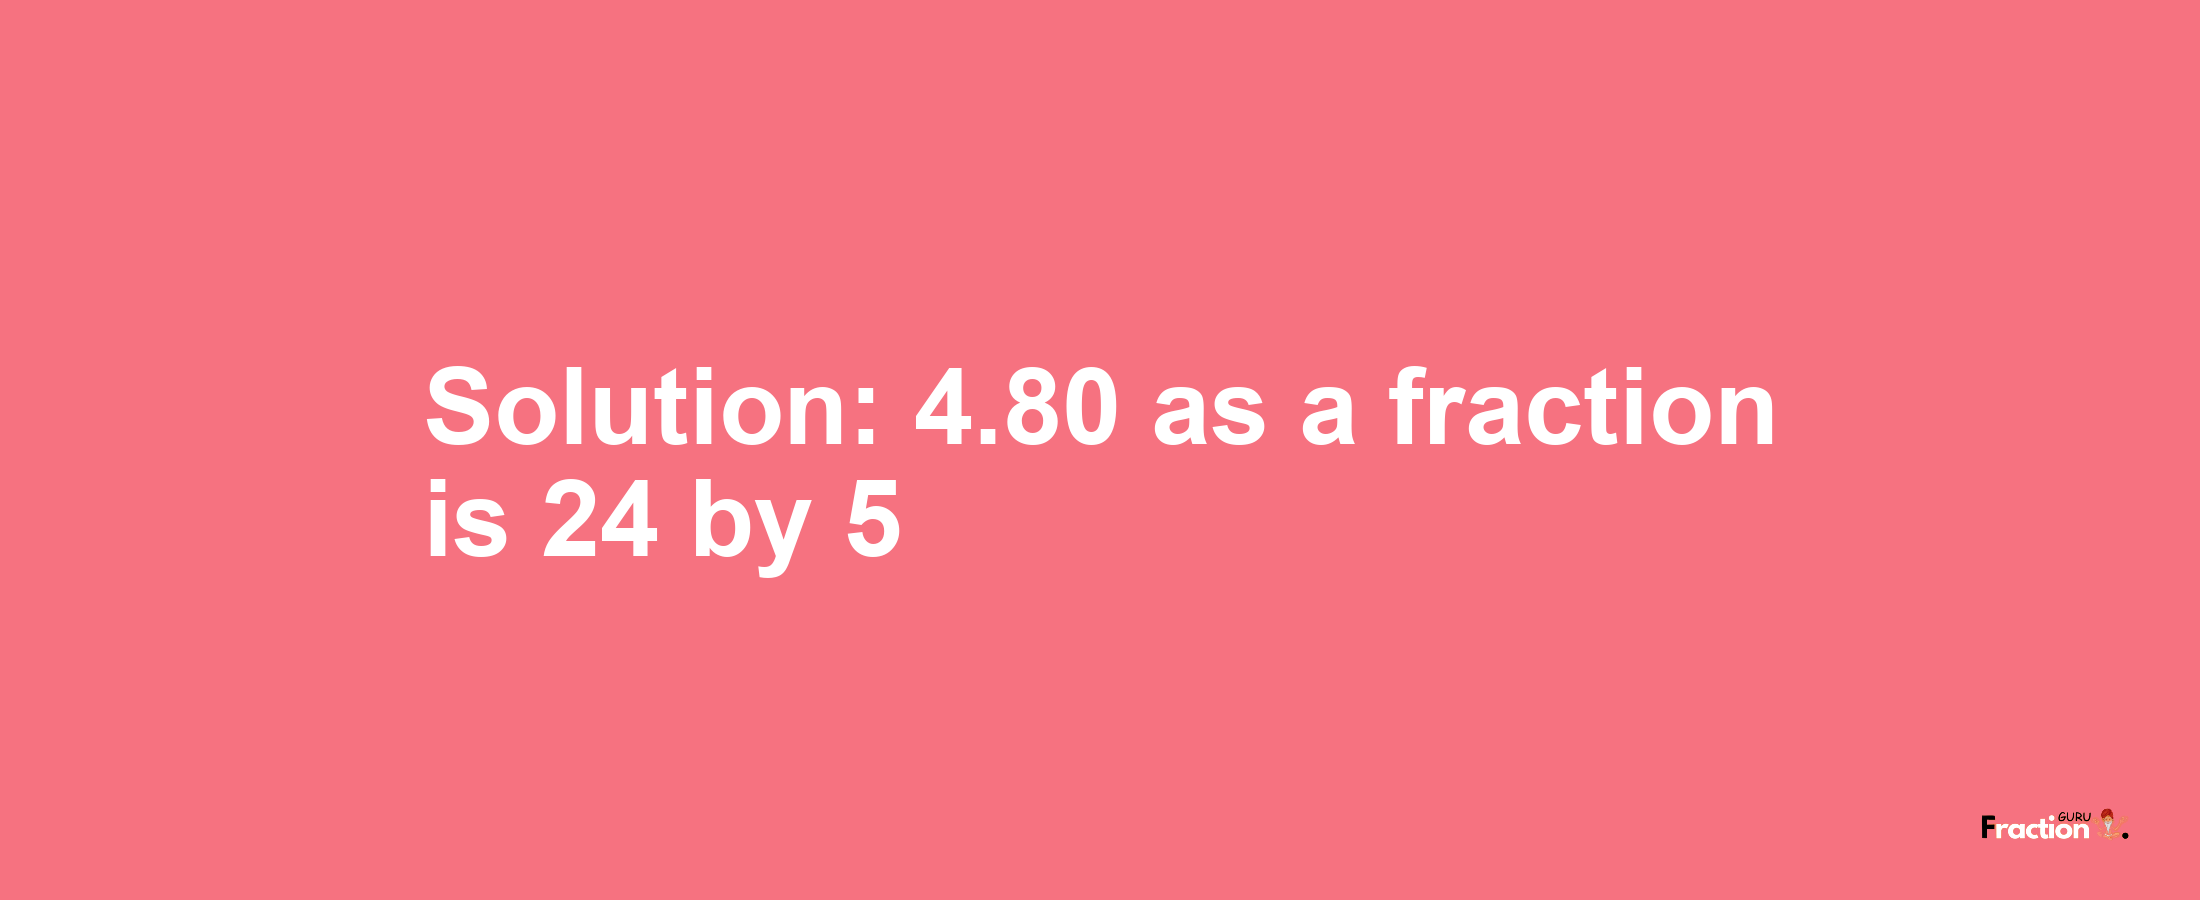 Solution:4.80 as a fraction is 24/5